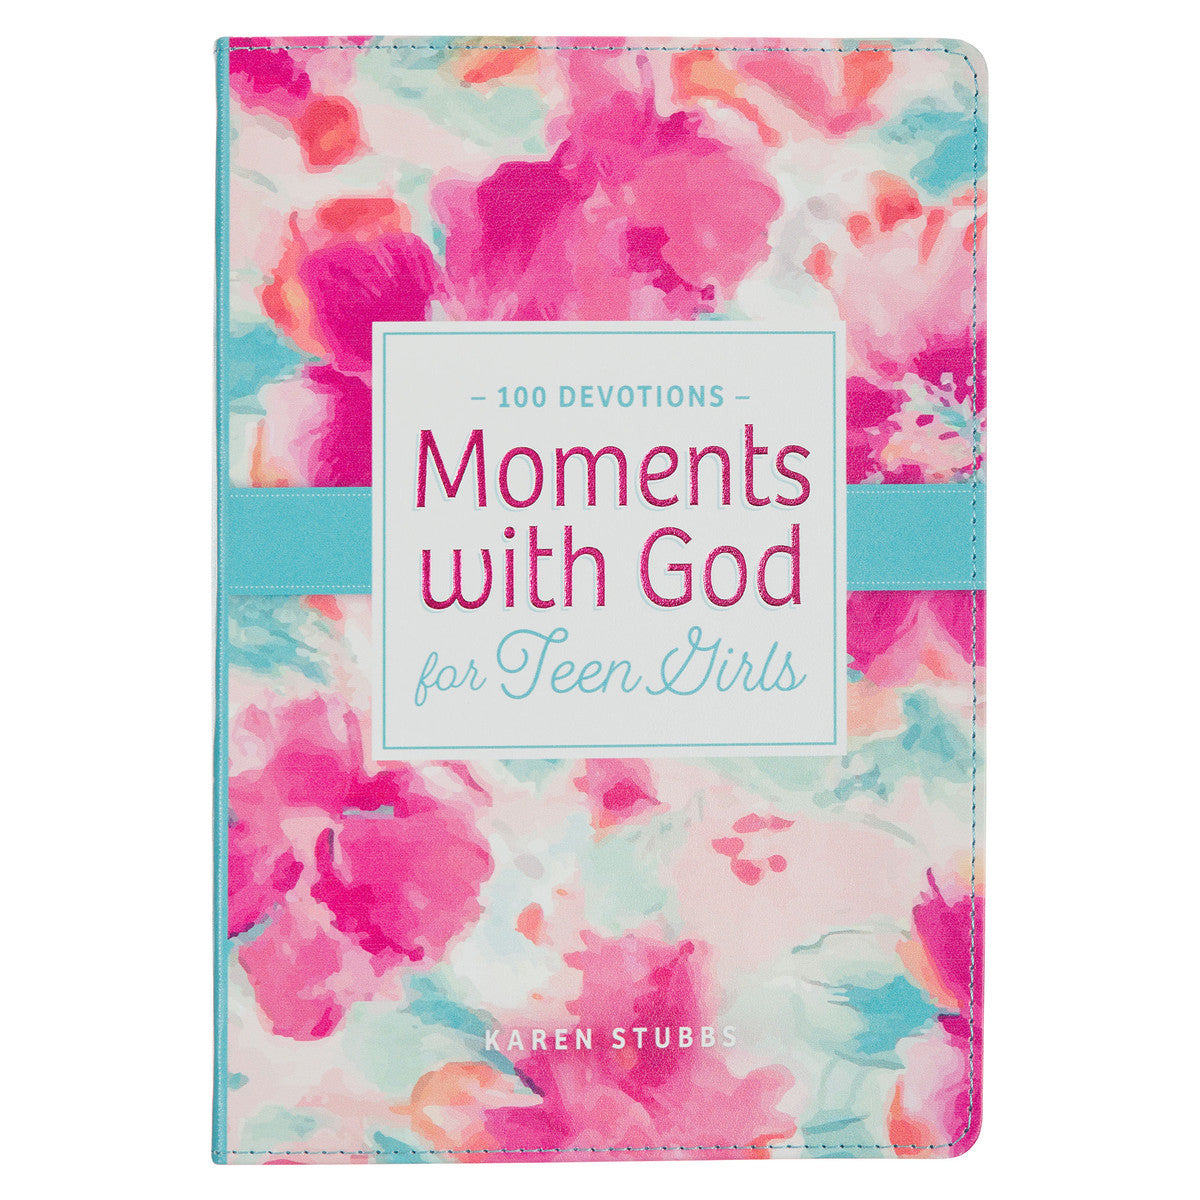 Moments with God for Teen Girls